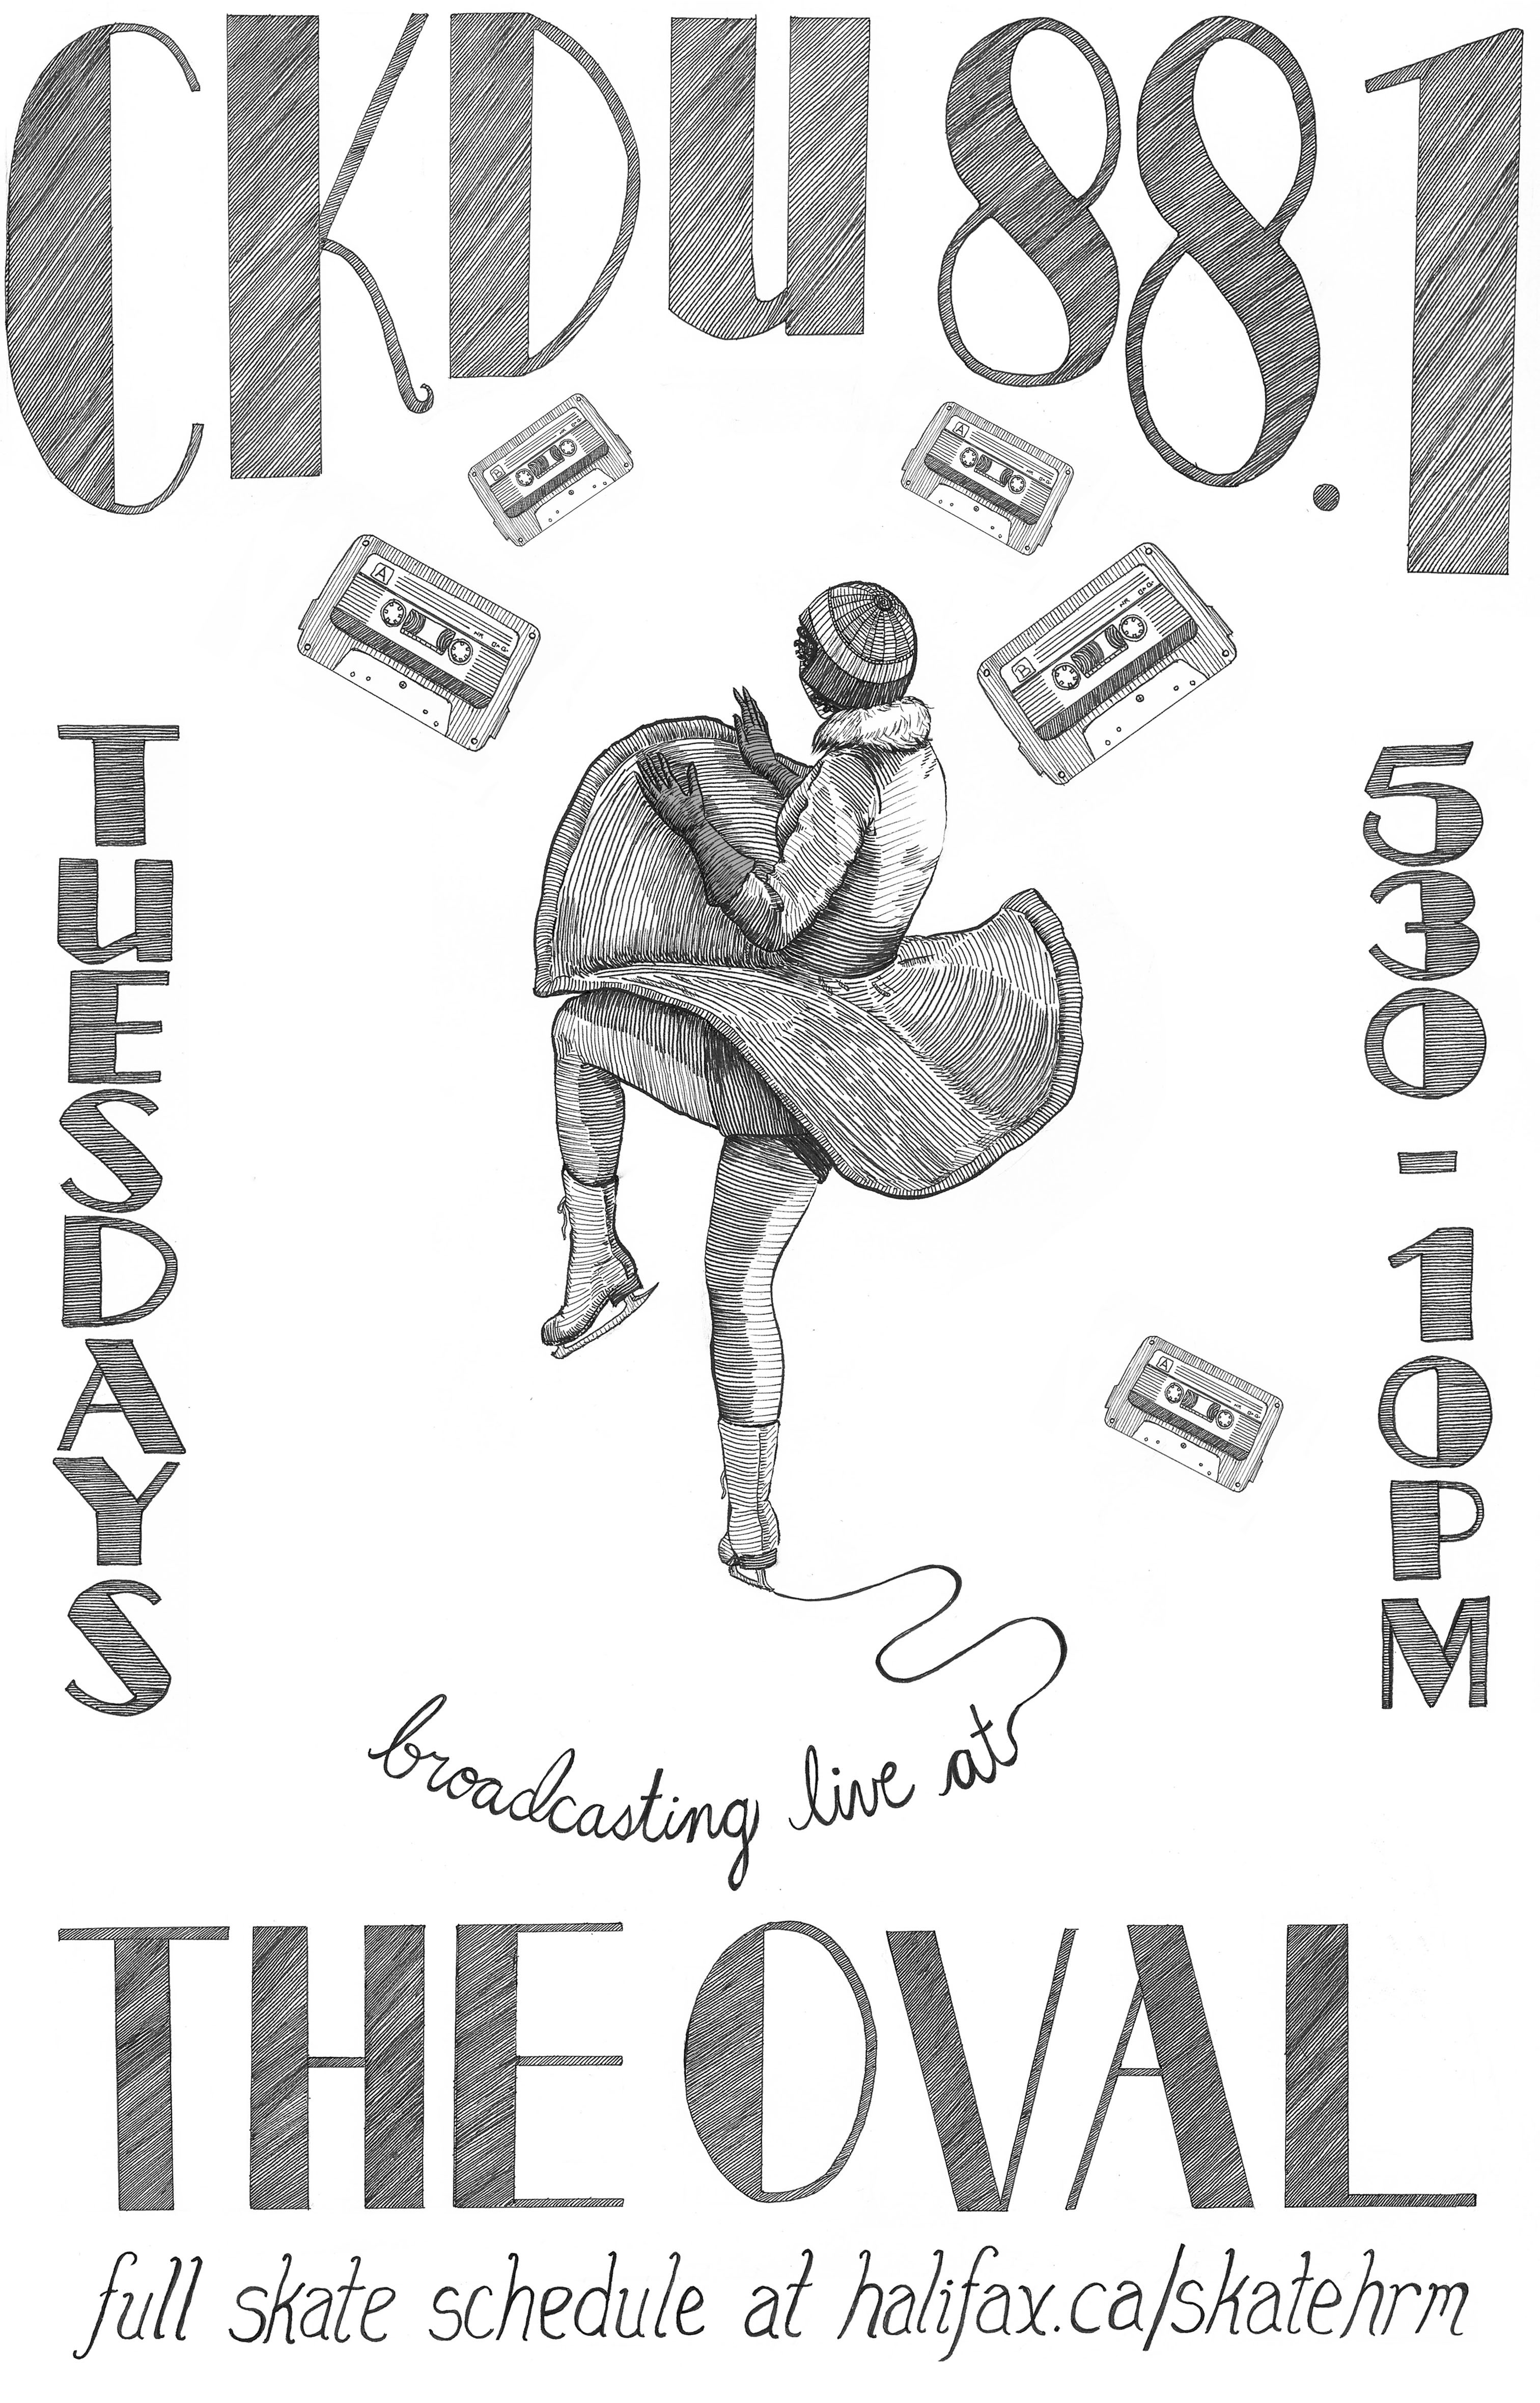 Tuesday night is CKDU night at the Oval